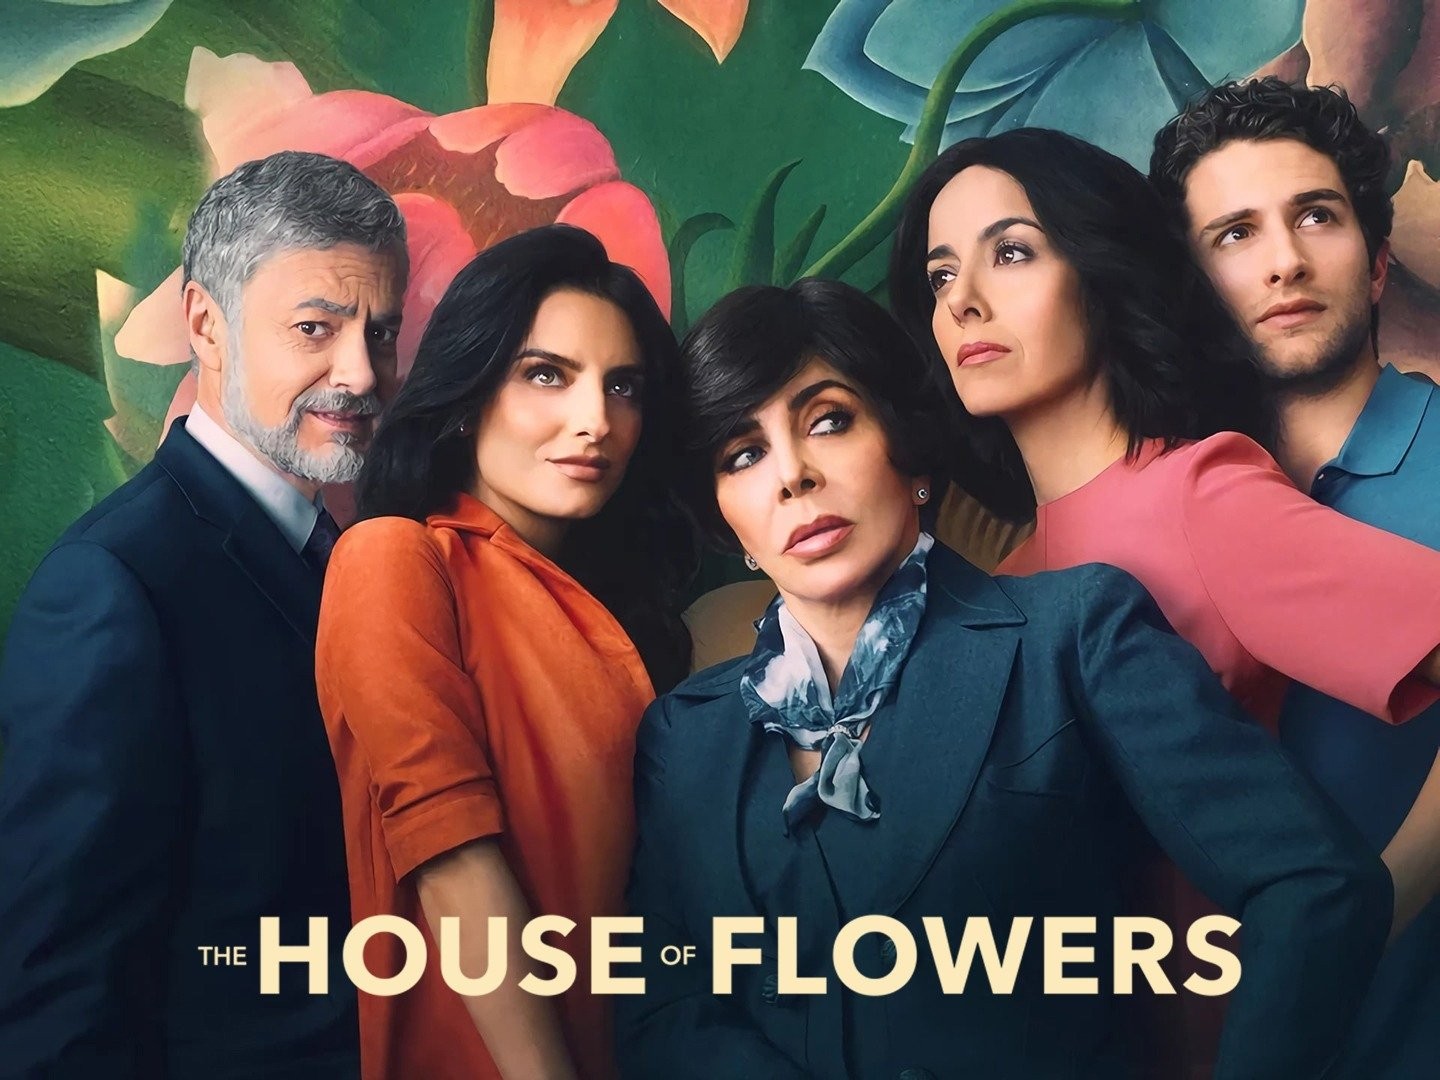 The House of Flowers (TV series) - Wikipedia